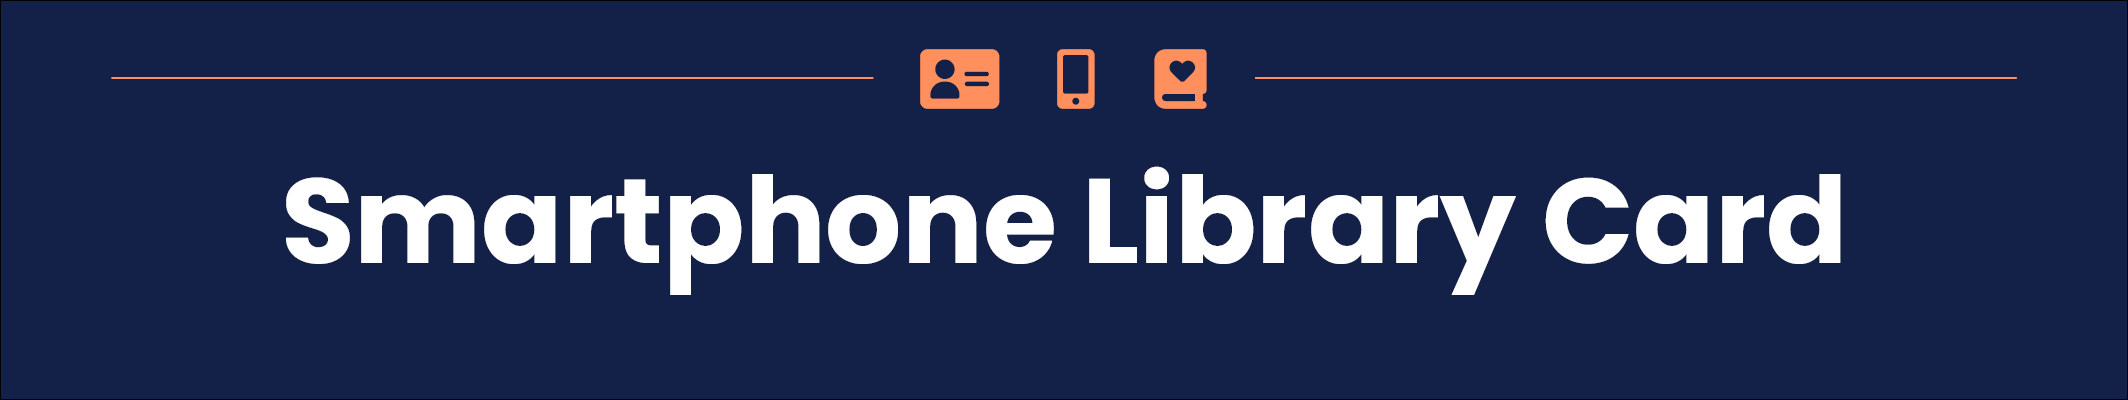 Smartphone Library card